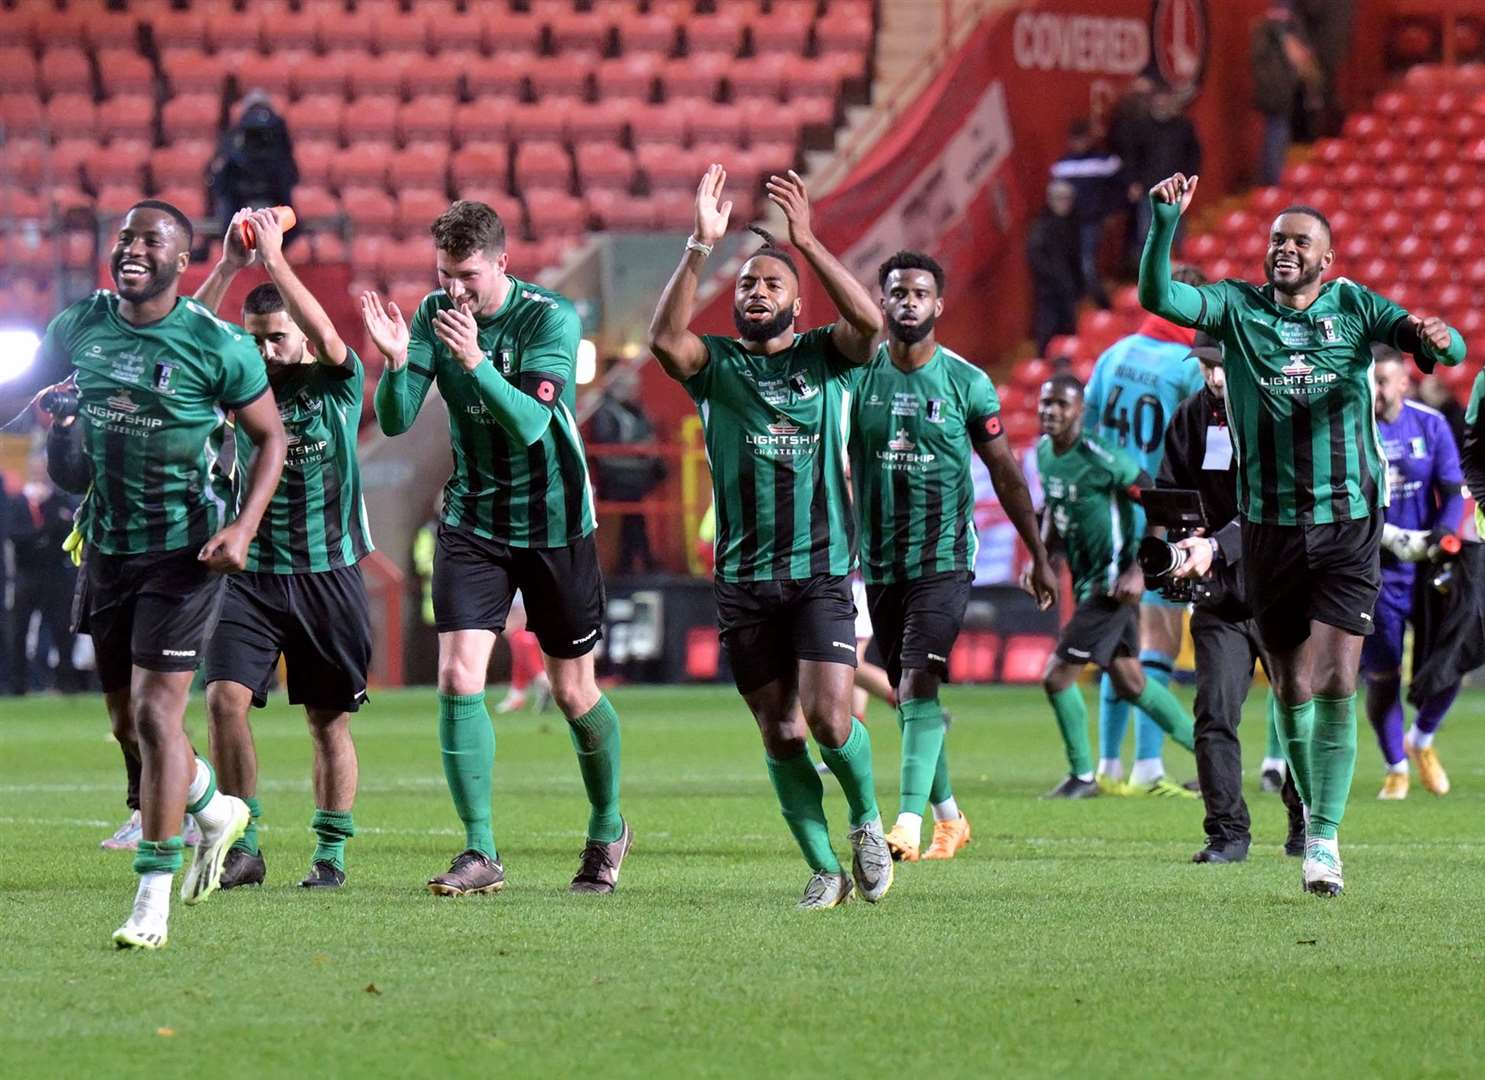 Cray Valley celebrate their 1-1 draw at Charlton on Sunday. Picture: Keith Gillard